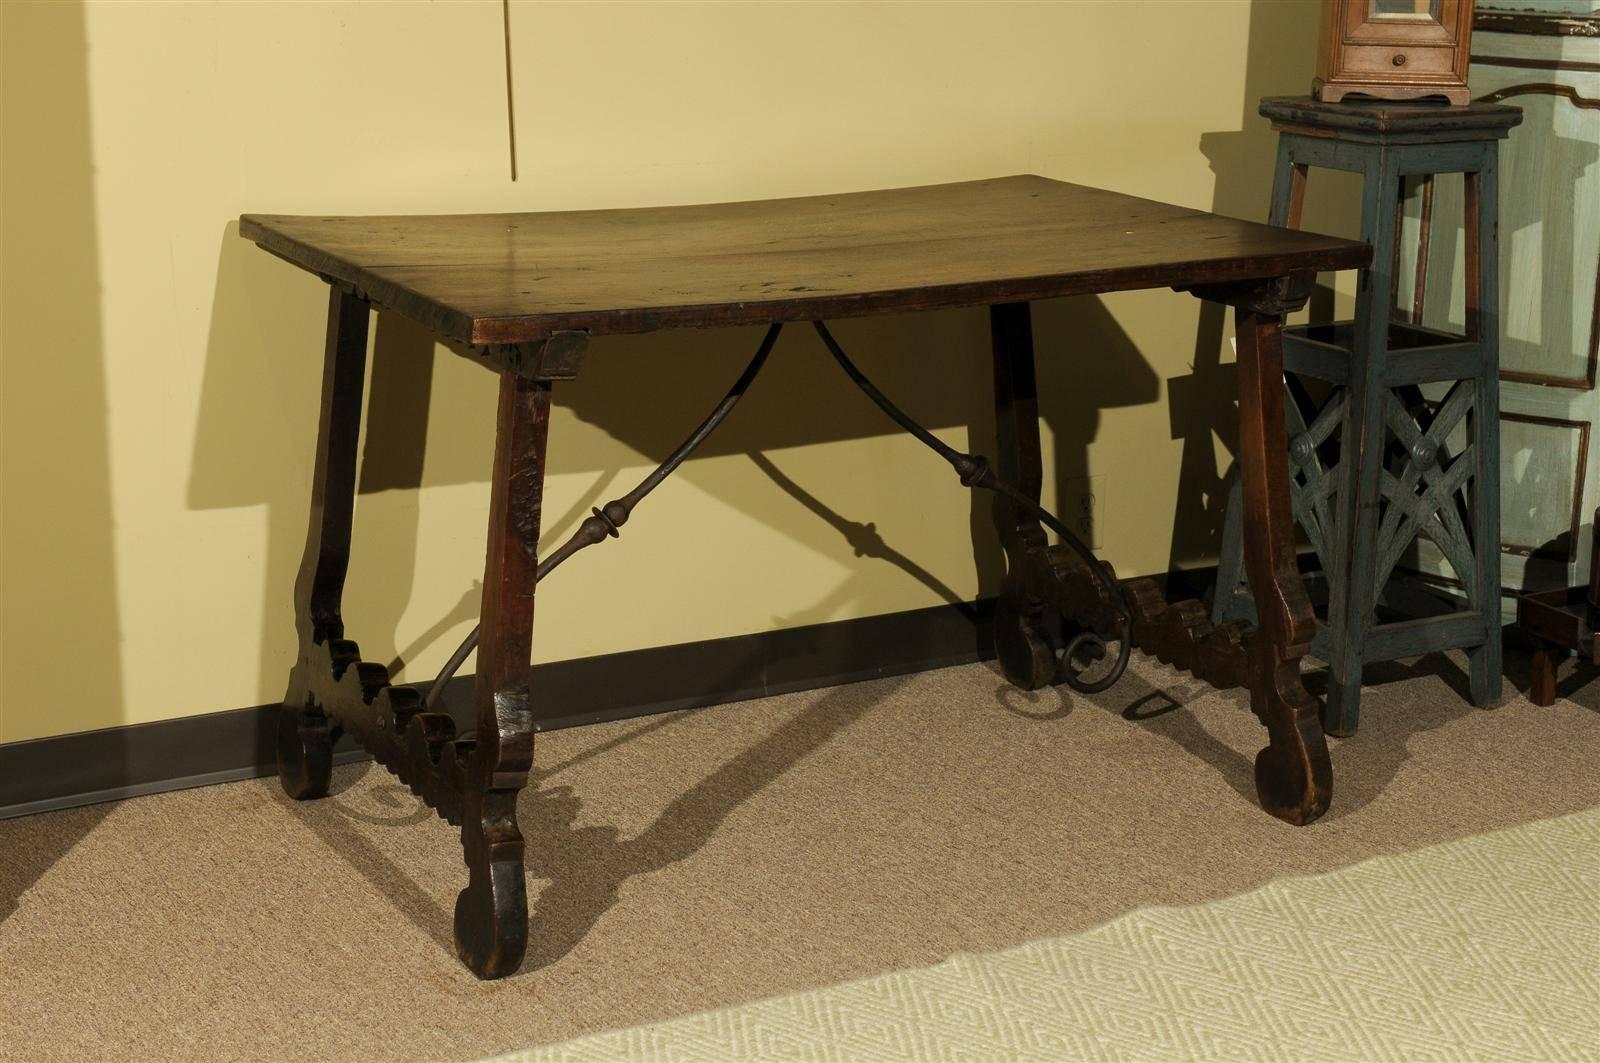 18th Century Spanish Table in Dark Brown Oak with Iron Stretcher, circa 1780
This lovely rustic 18th century table is handmade in rich dark oak. It would make a great library table or center table in a more casual setting. It would also make a nice